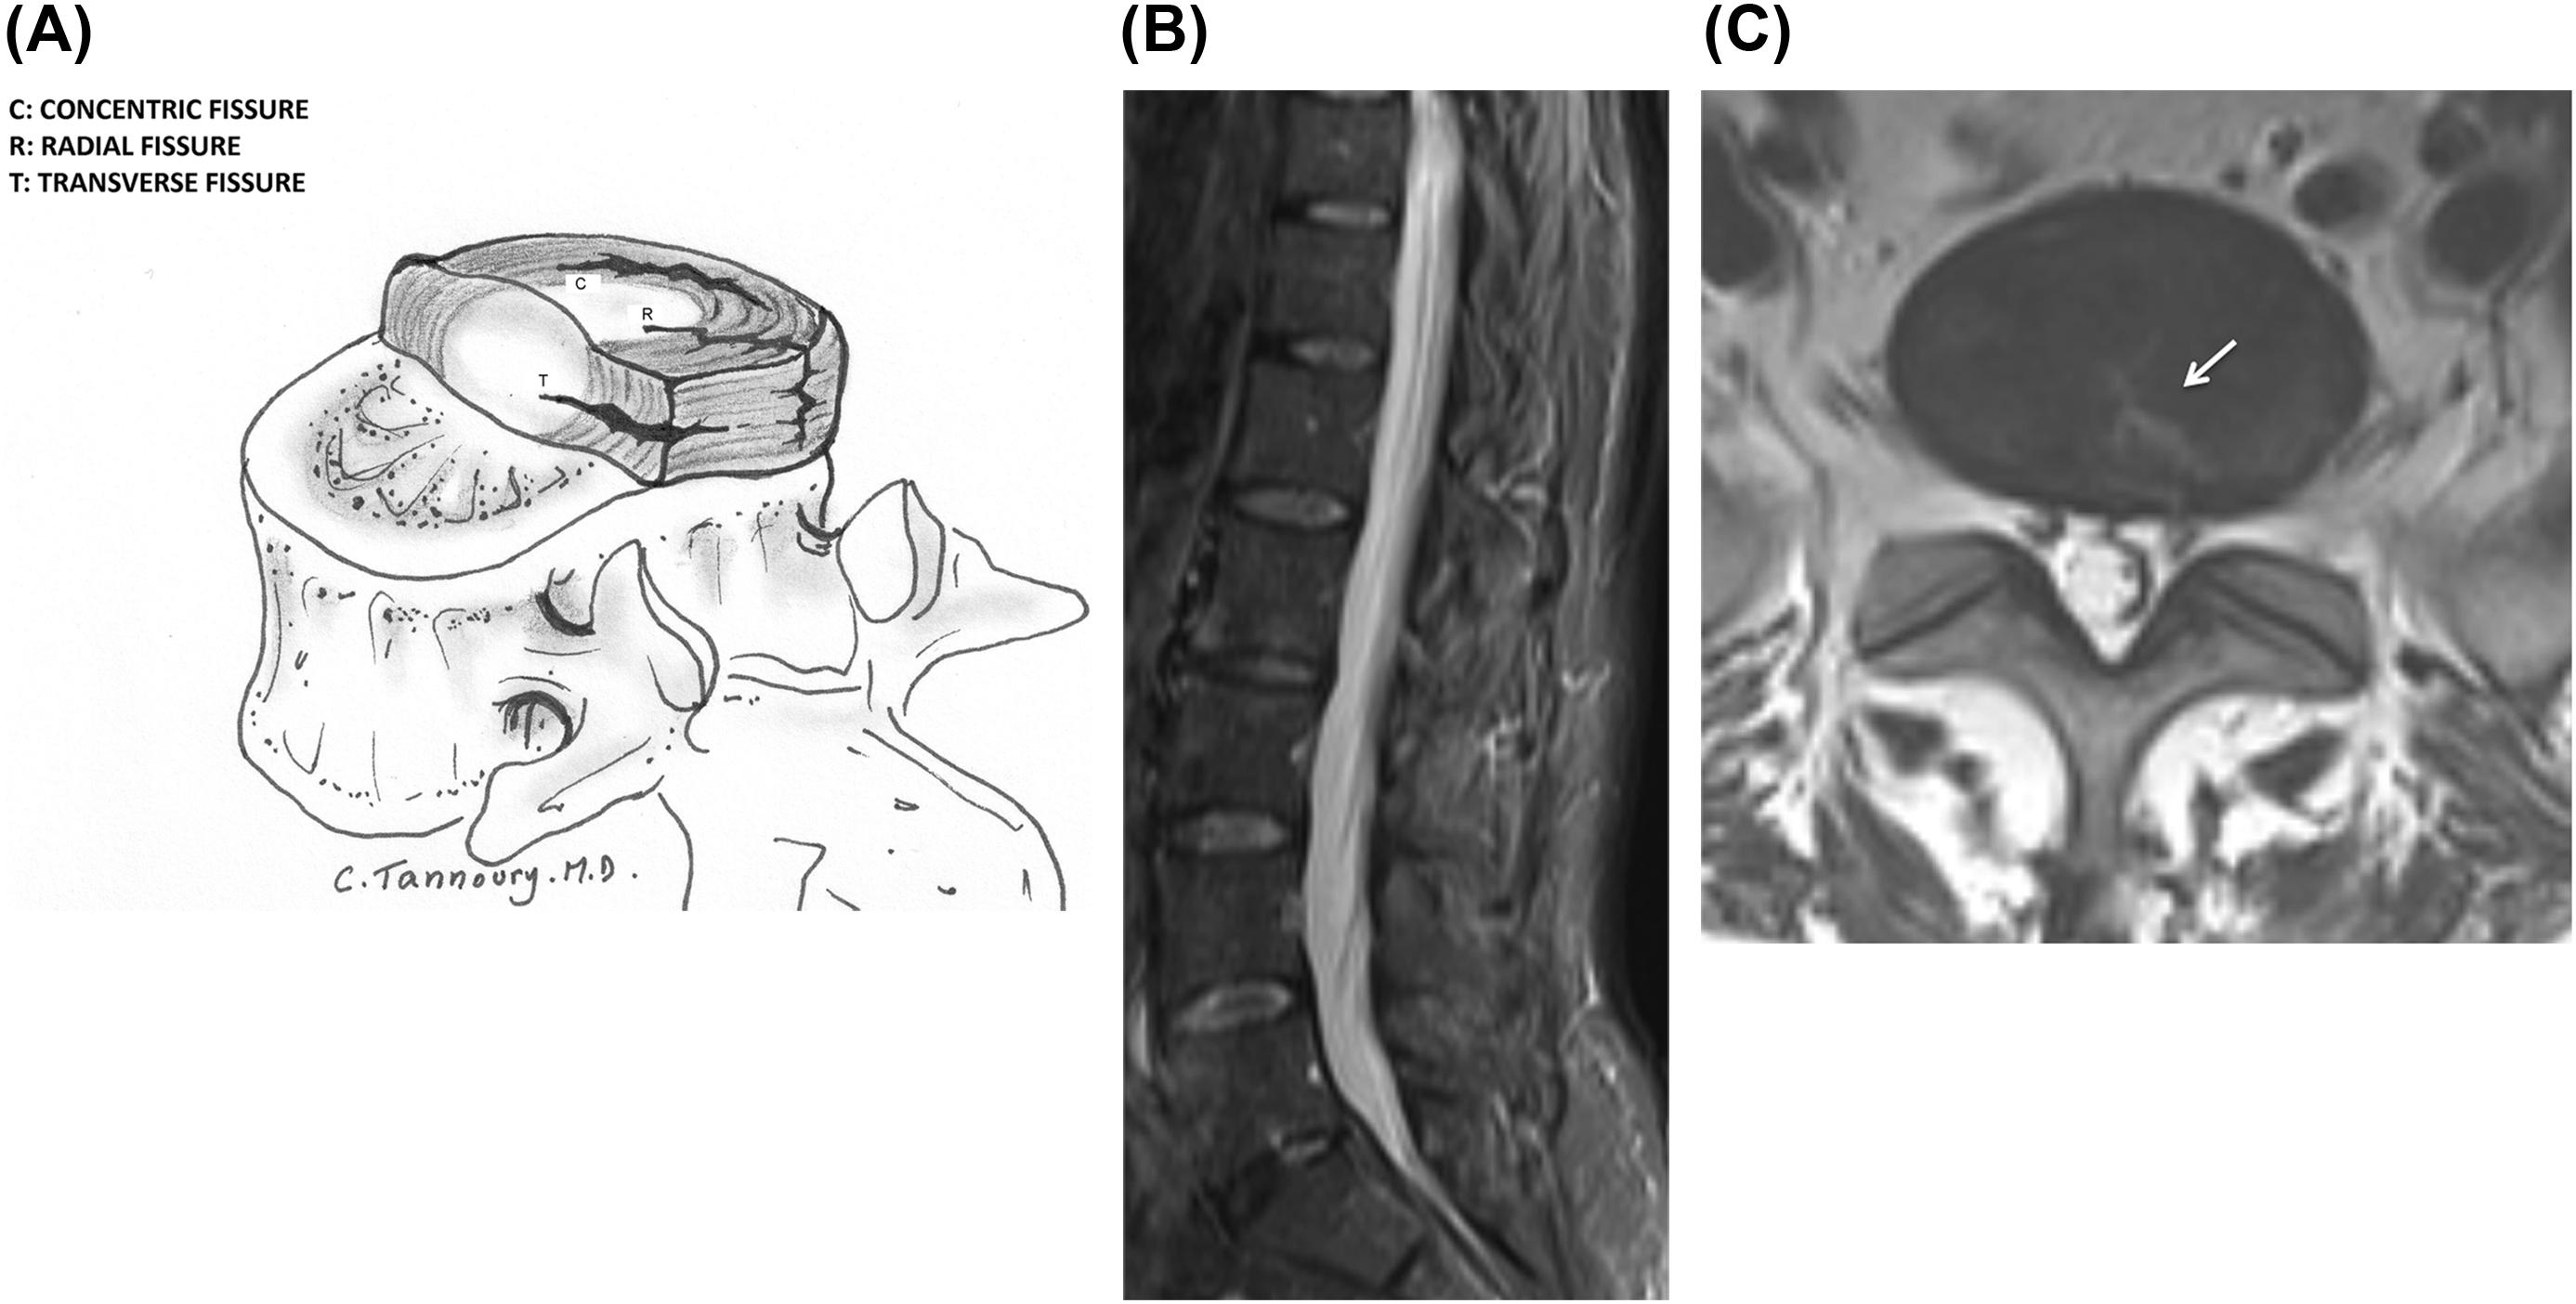 Figure 8.5, Graphic representation of types of fissures (A). MR imaging reveals a dark center of the nucleus, suggesting moderate degeneration on sagittal STIR (B) and axial T2 (C, arrow ) sequences. Note the hyperintense T2 area extending posteriorly from the center to the periphery of the annulus.